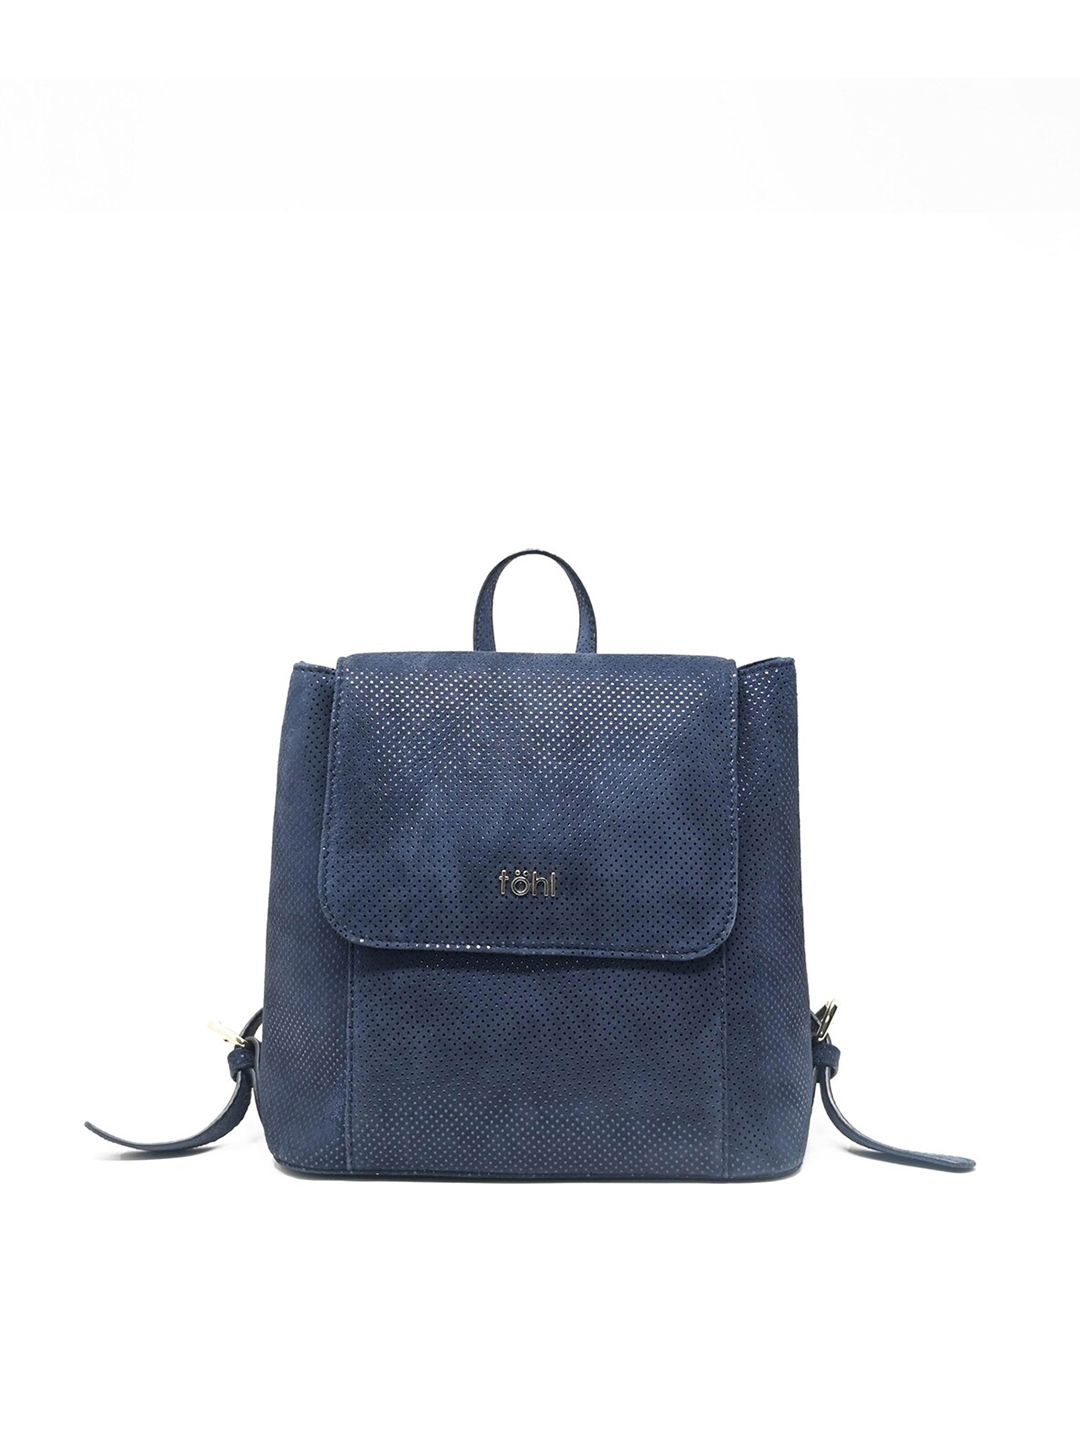 tohl Women Navy Blue Backpack Price in India